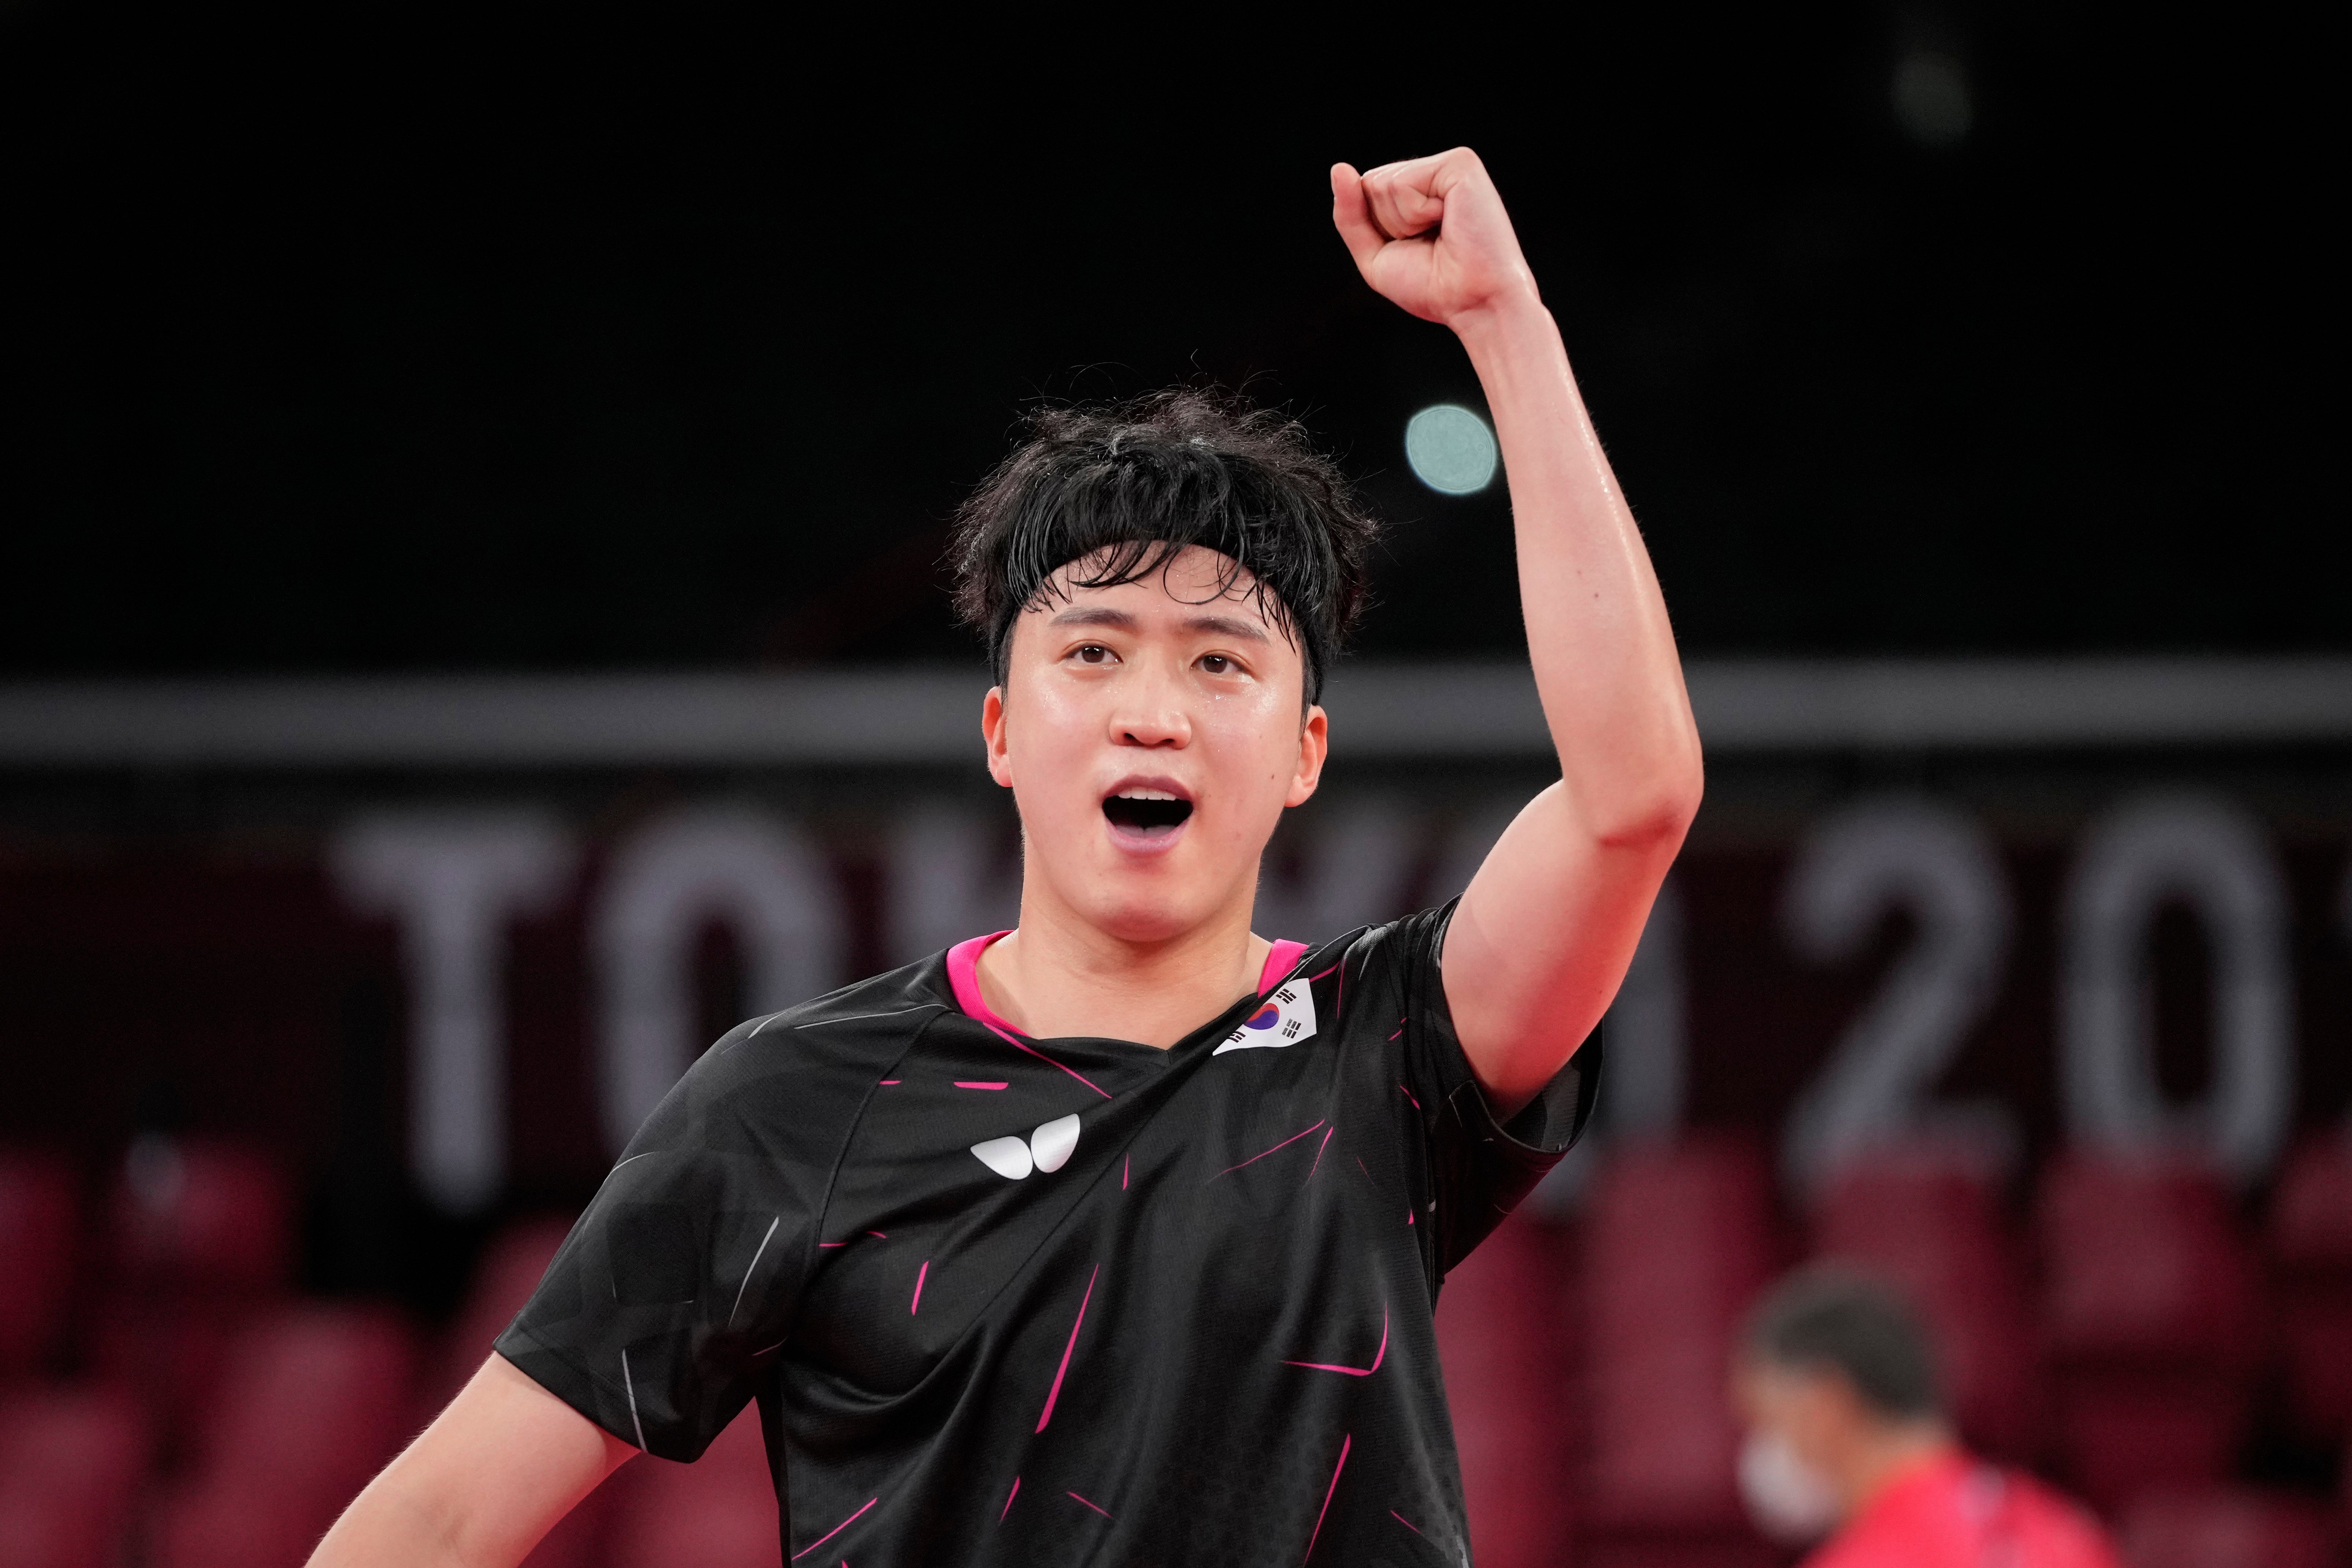 Jeoung Young-sik celebrates after defeating Greek player Panagiotis Gionis in Round 3 of the men’s table tennis singles competition